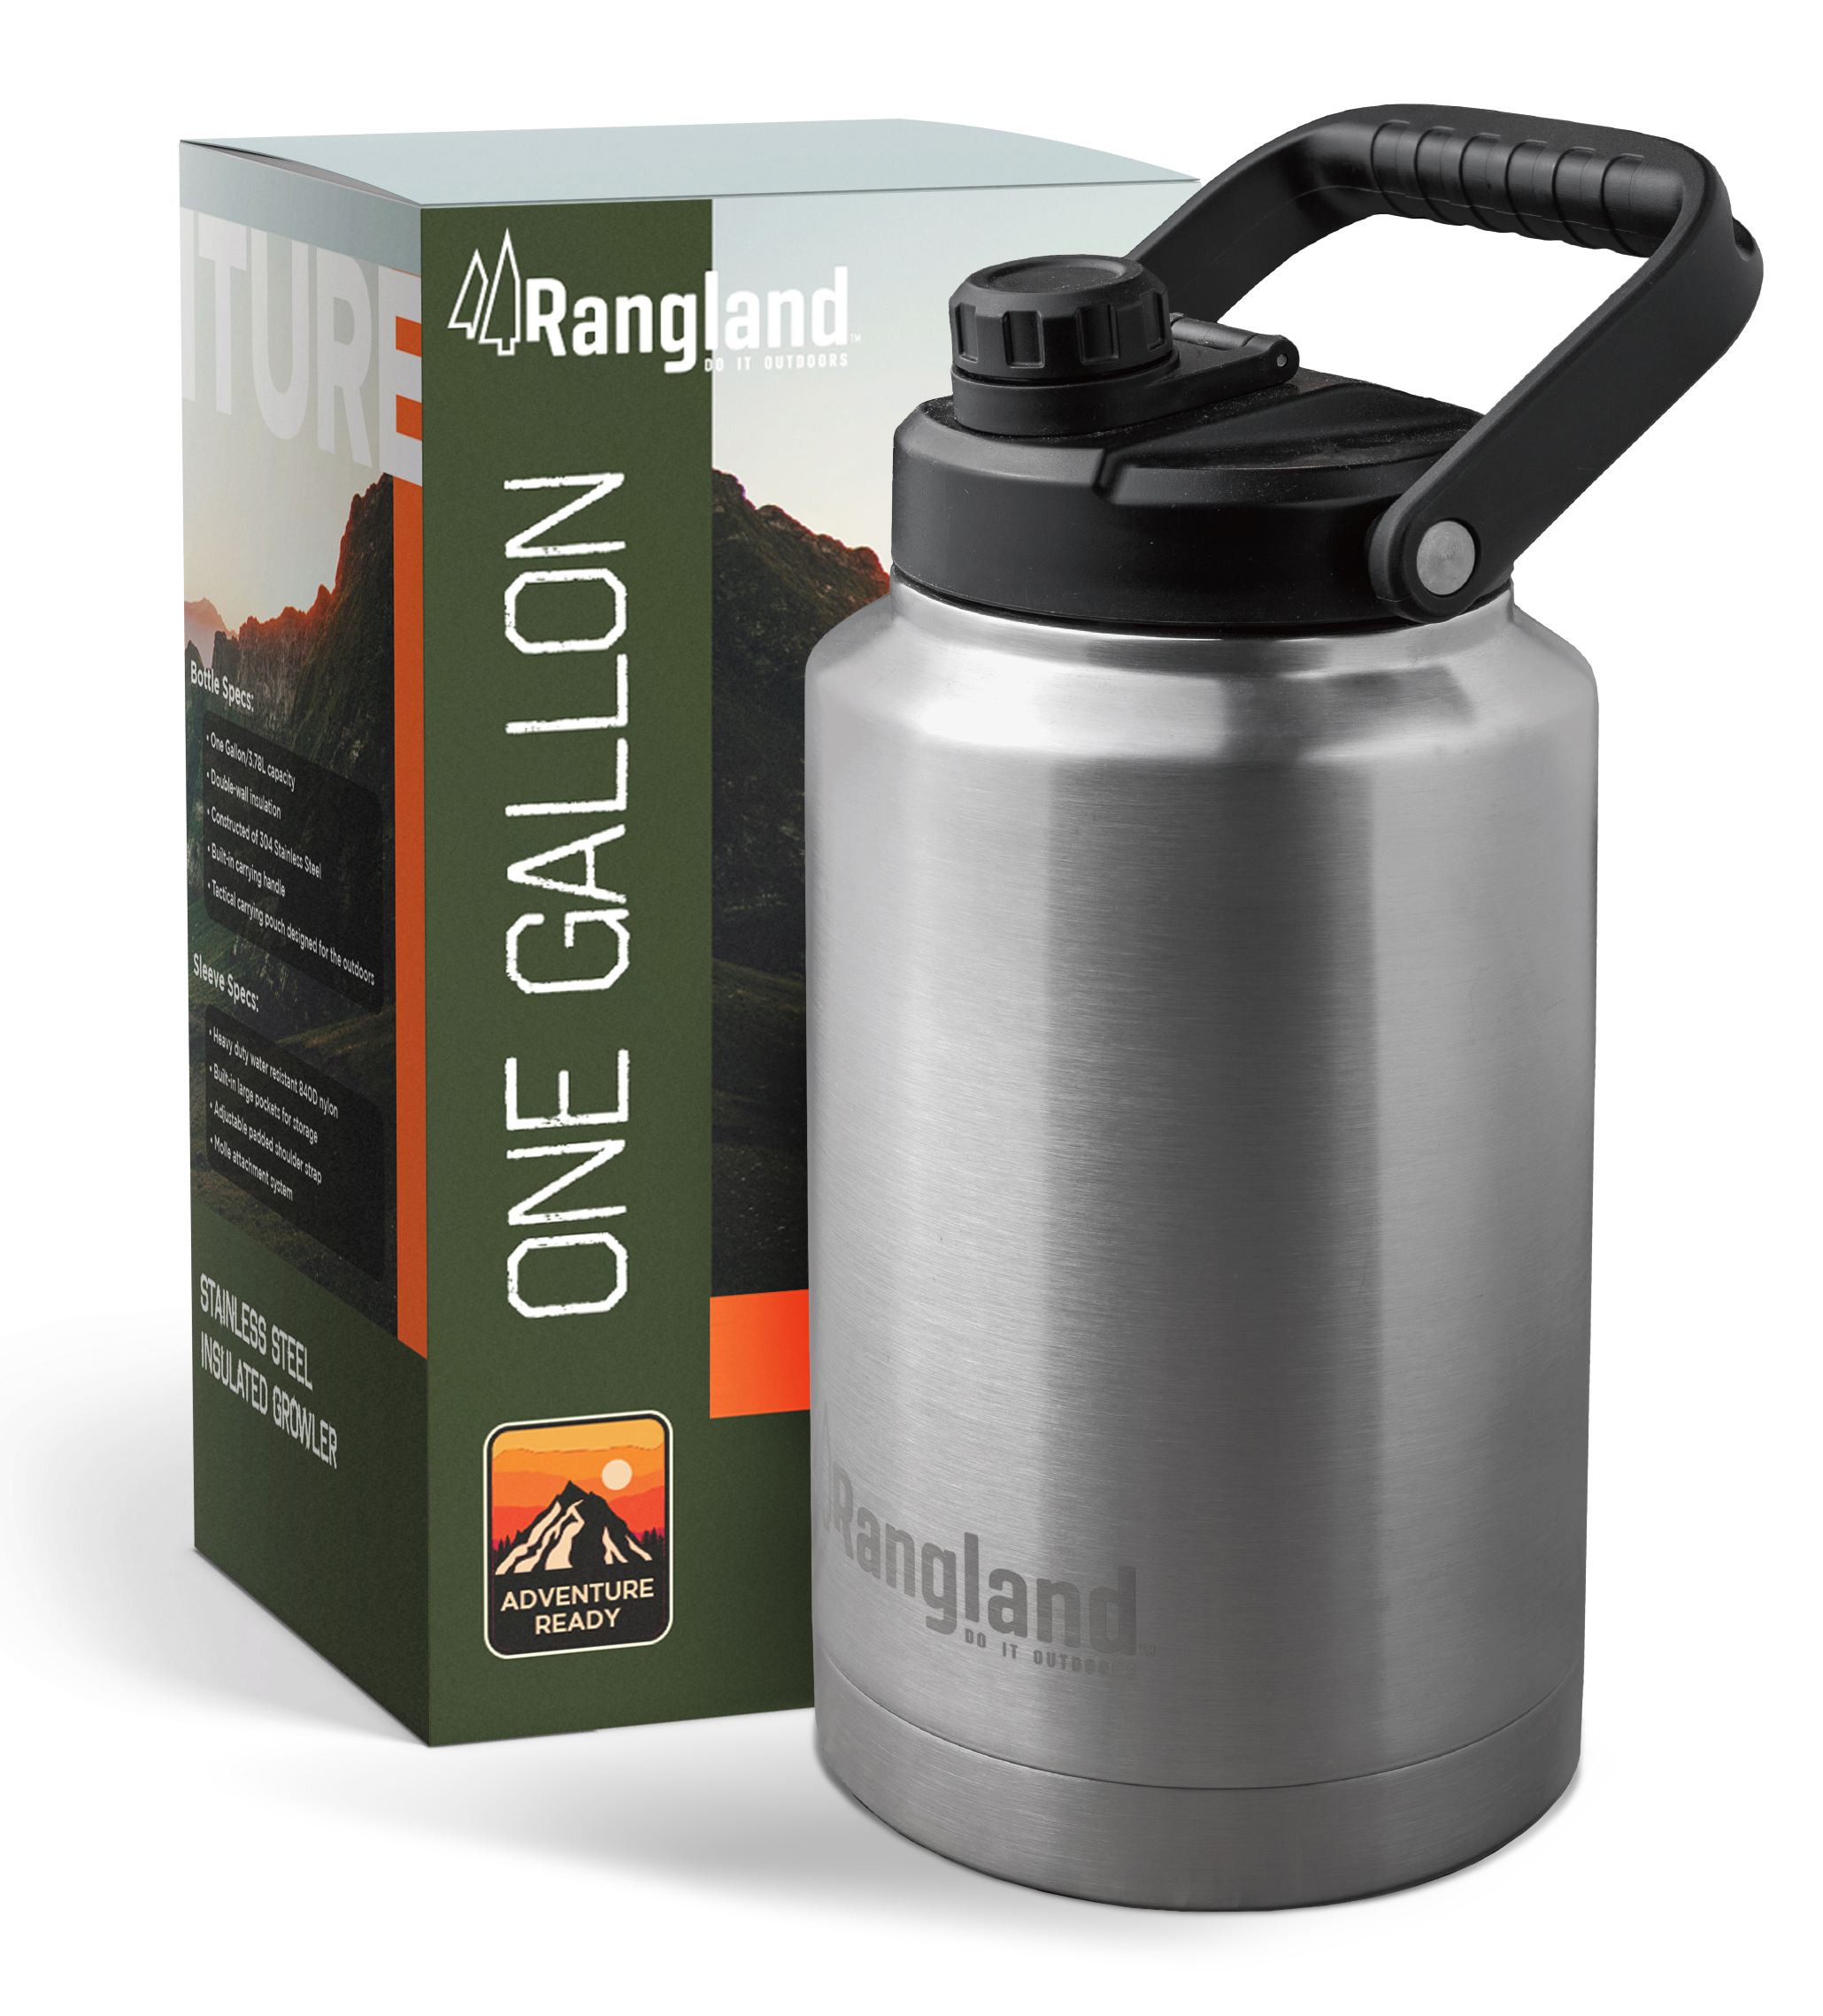 Rangland 1 Gallon Water Bottle with Insulated Storage Sleeve, 128 oz  Stainless Steel - Encased